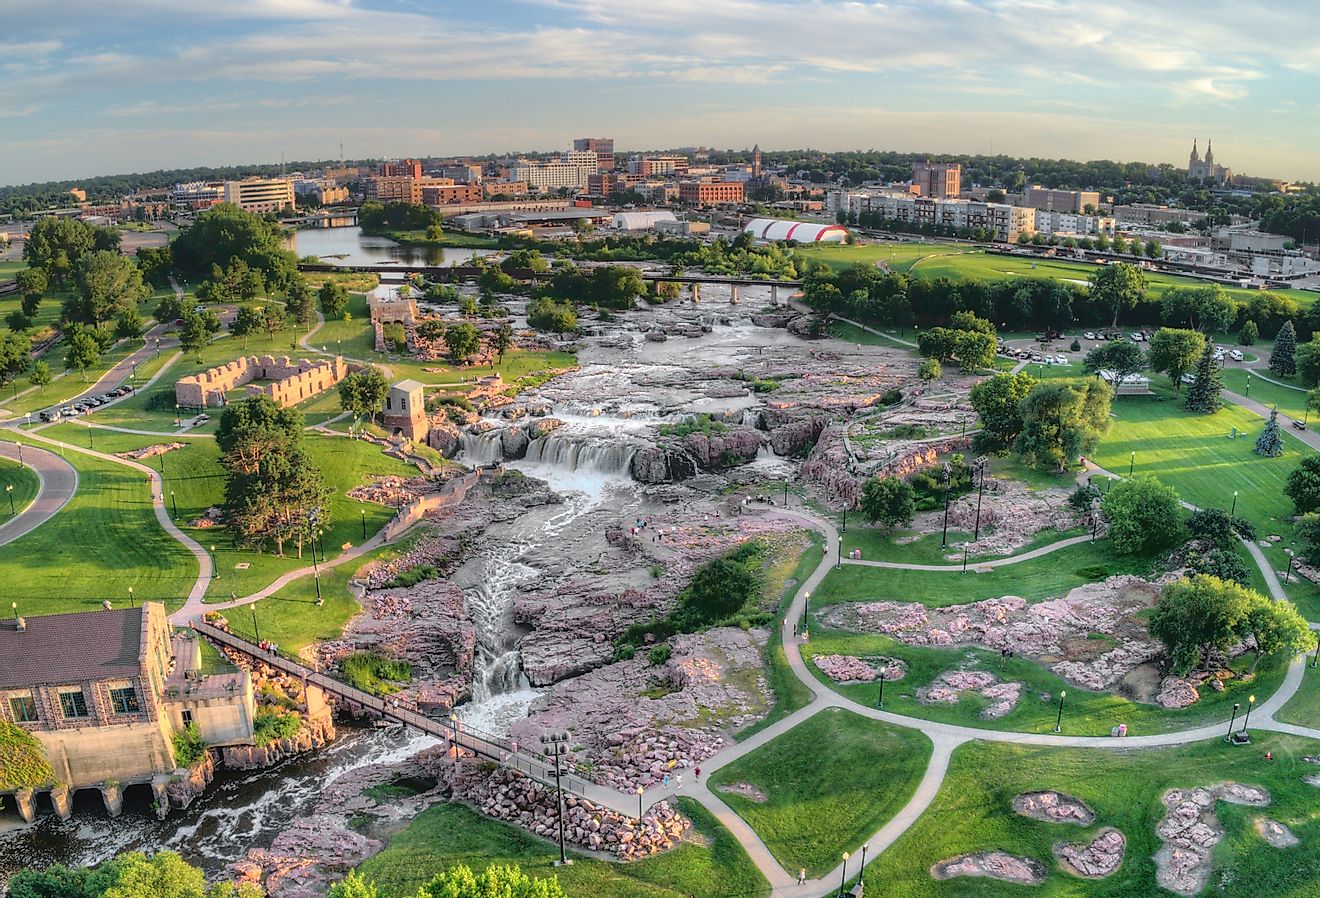 Summer Aerial View of Sioux Falls, the largest city in the State of South Dakota.